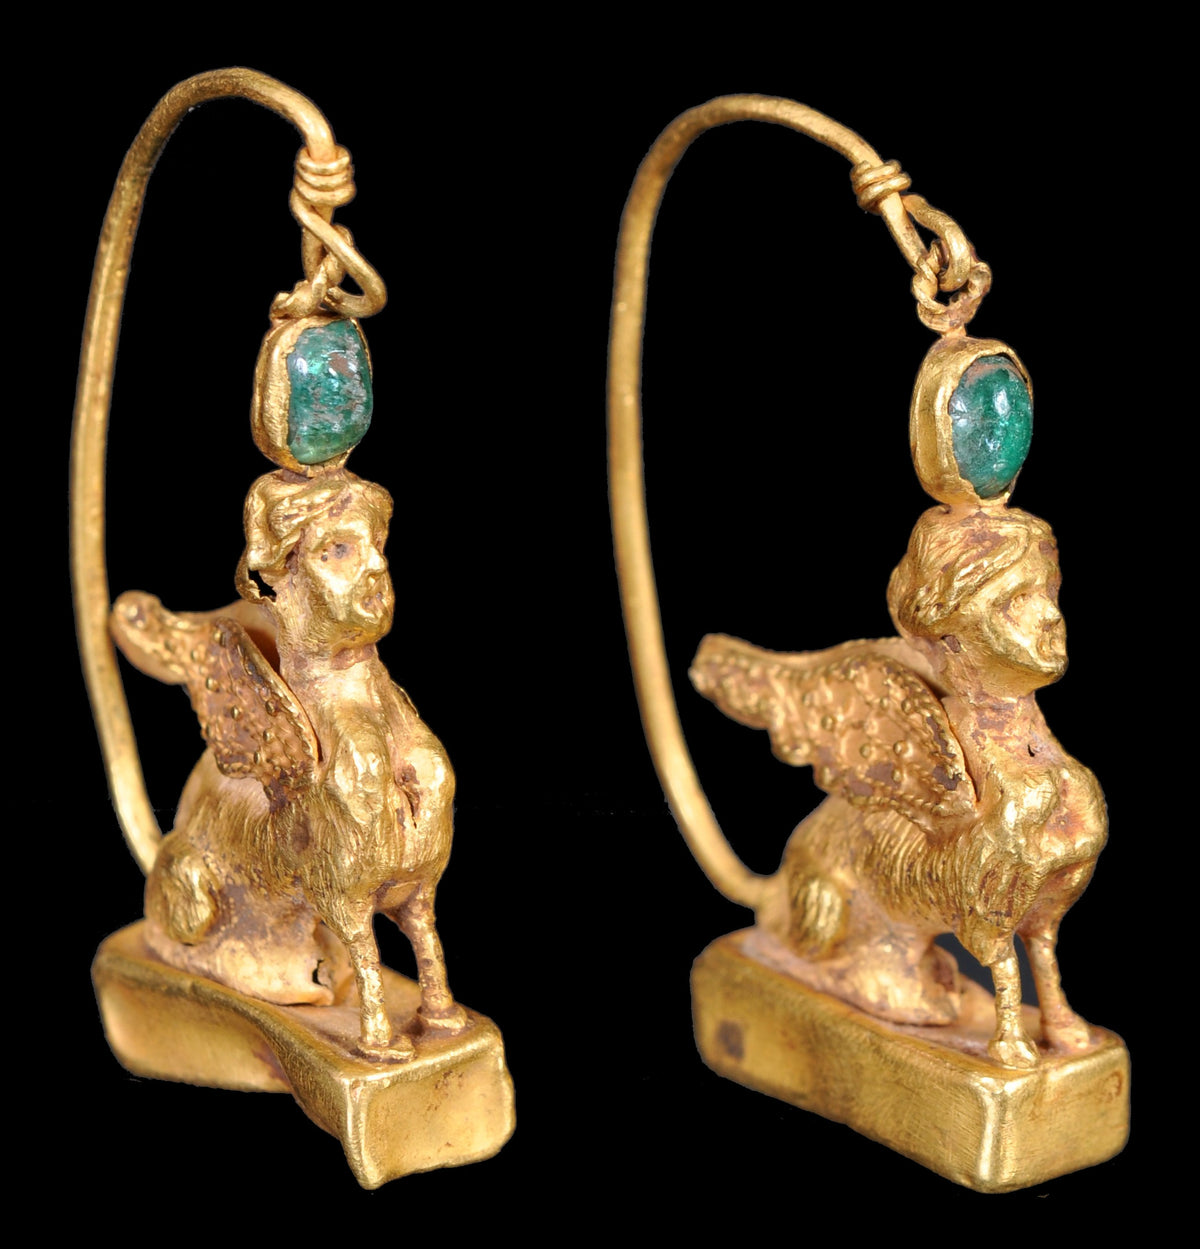 Pair of Ancient Greek Gold Sphinx Earrings, Helenistic Period, circa 3rd-2nd Century BCE